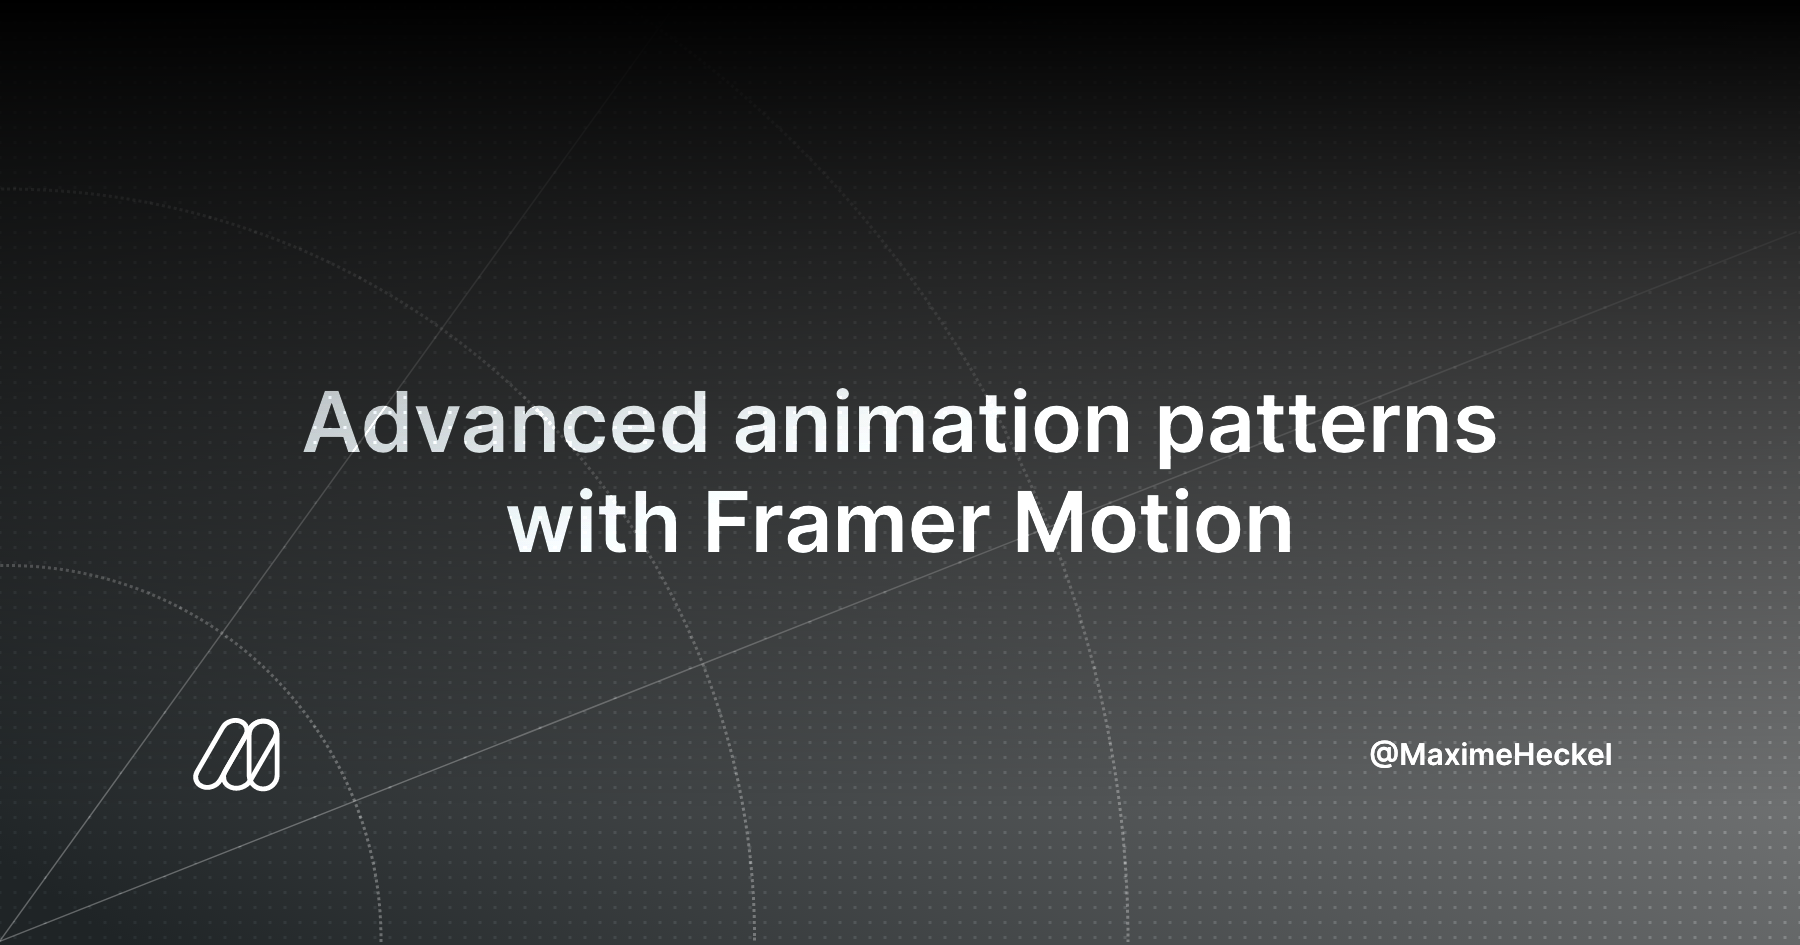 Advanced animation patterns with Framer Motion - Maxime Heckel's Blog